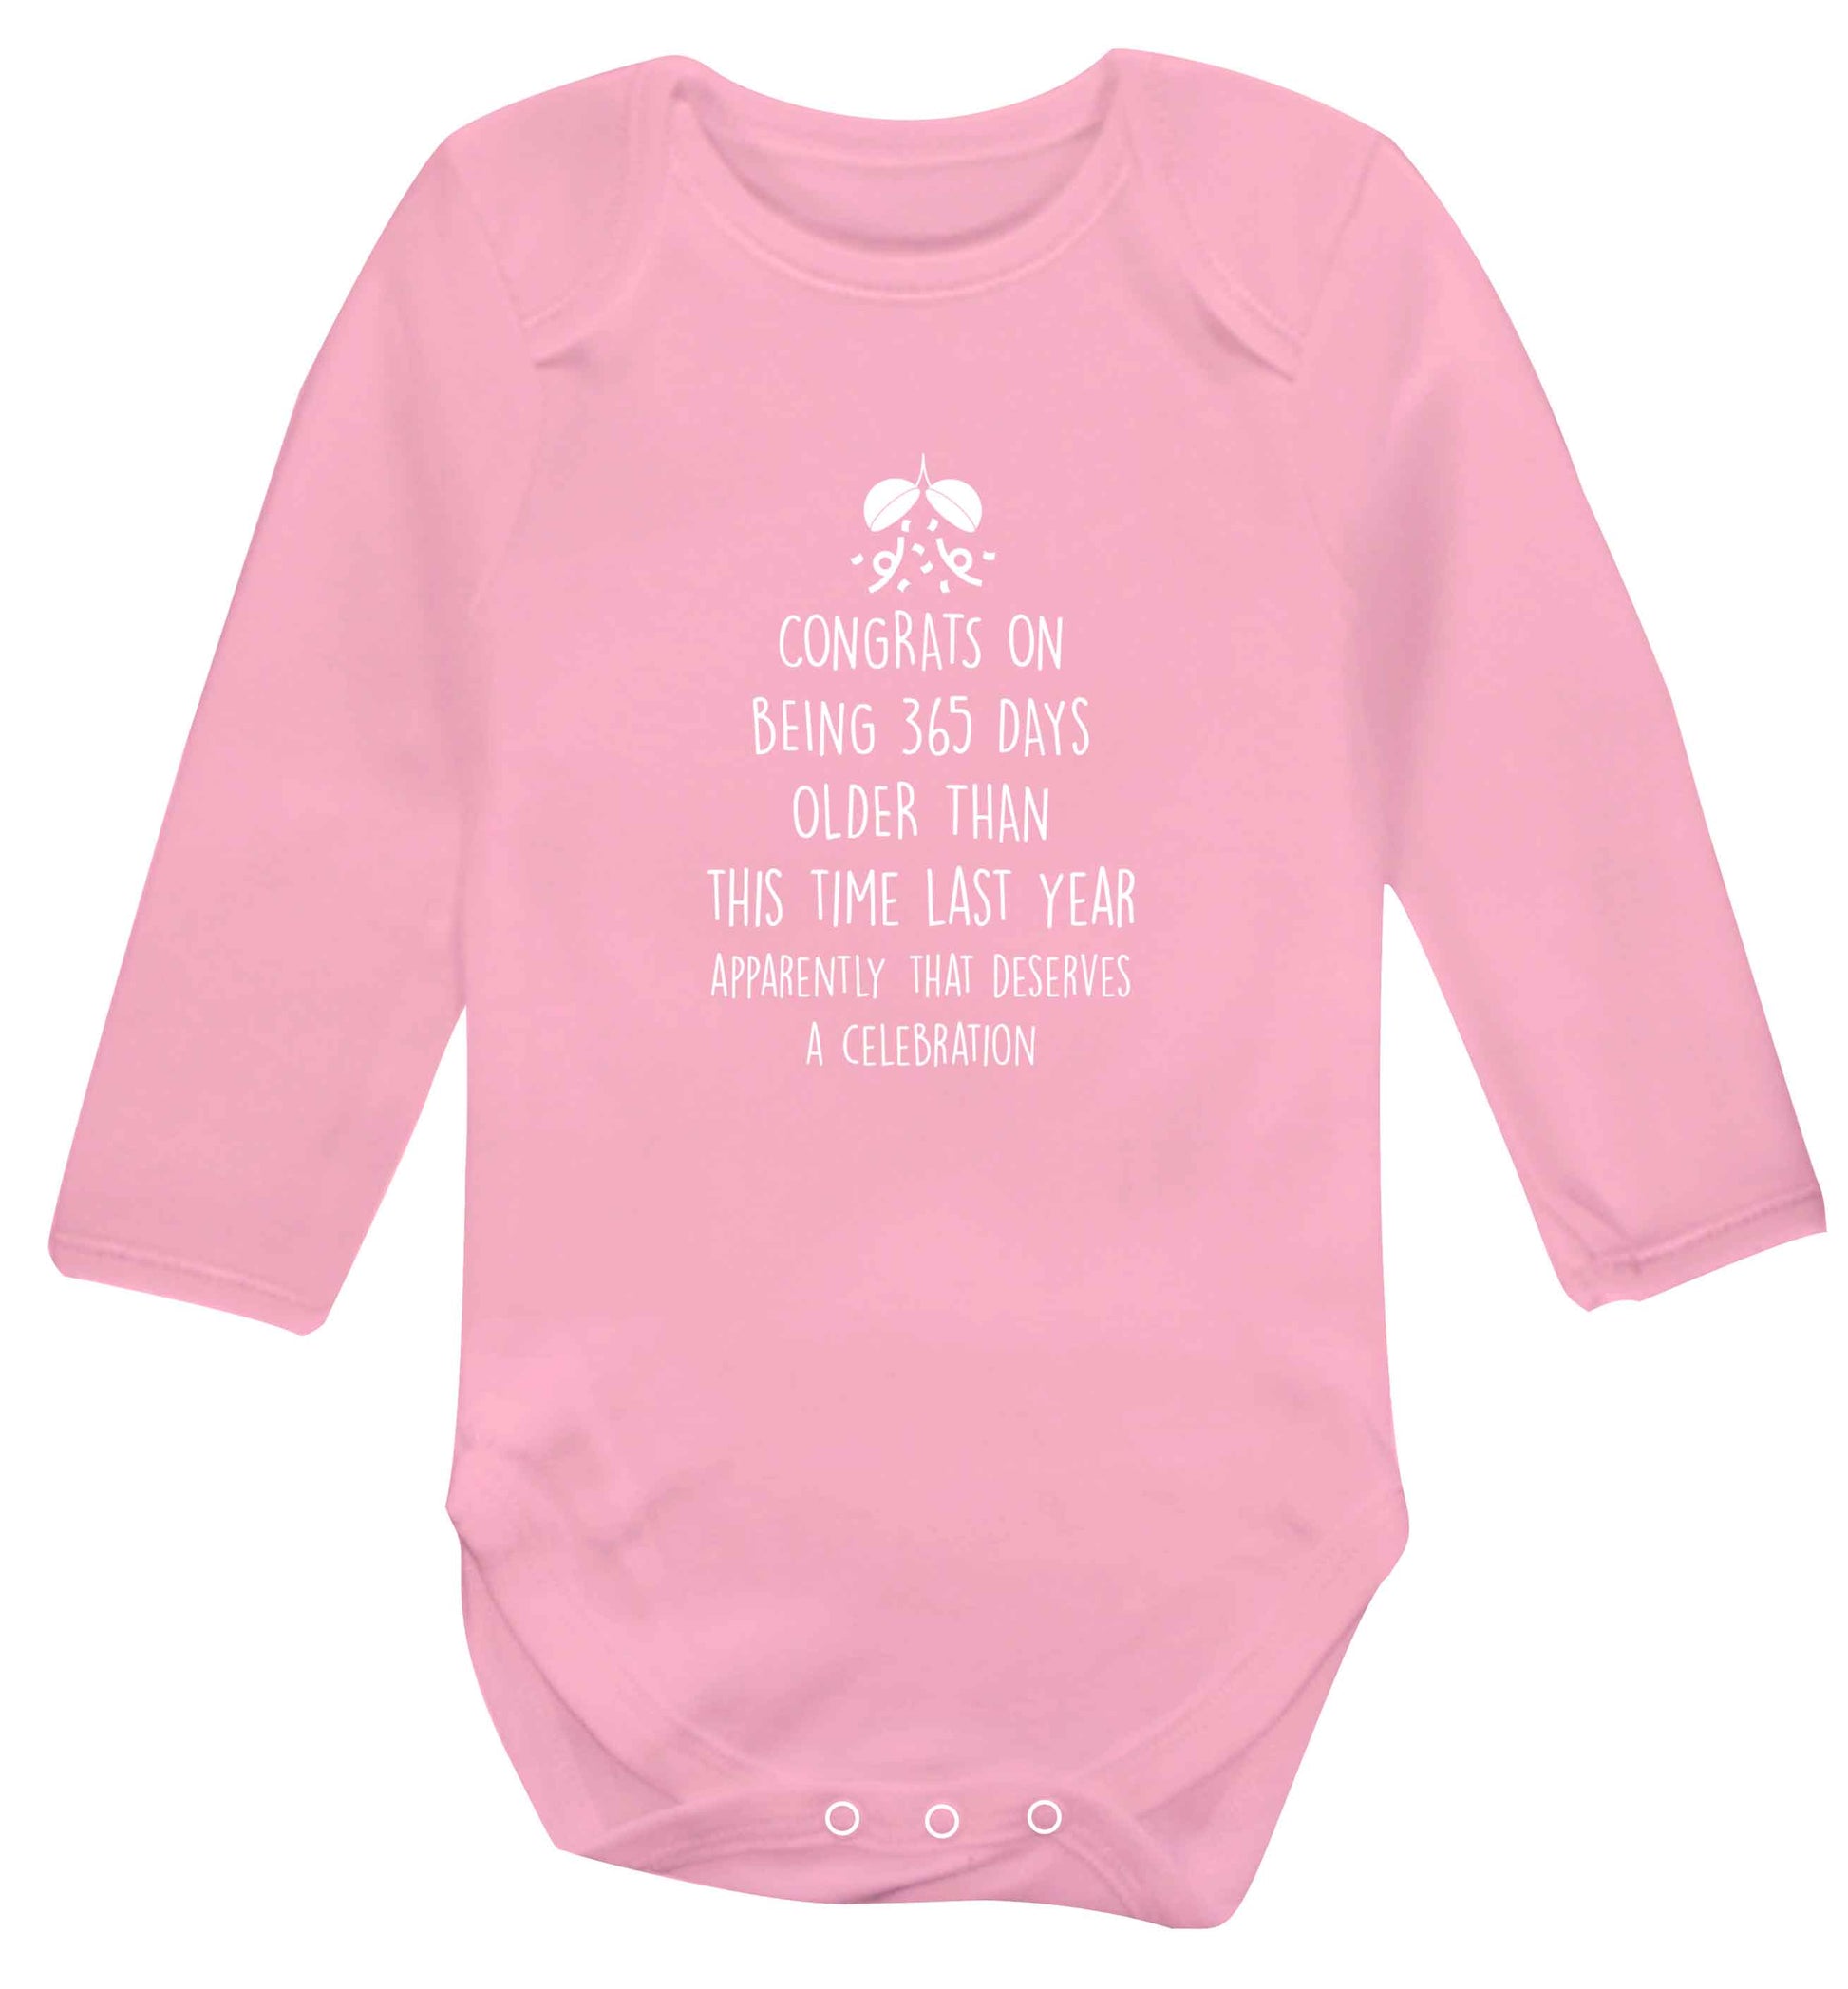 Congrats on being 365 days older than you were this time last year apparently that deserves a celebration baby vest long sleeved pale pink 6-12 months